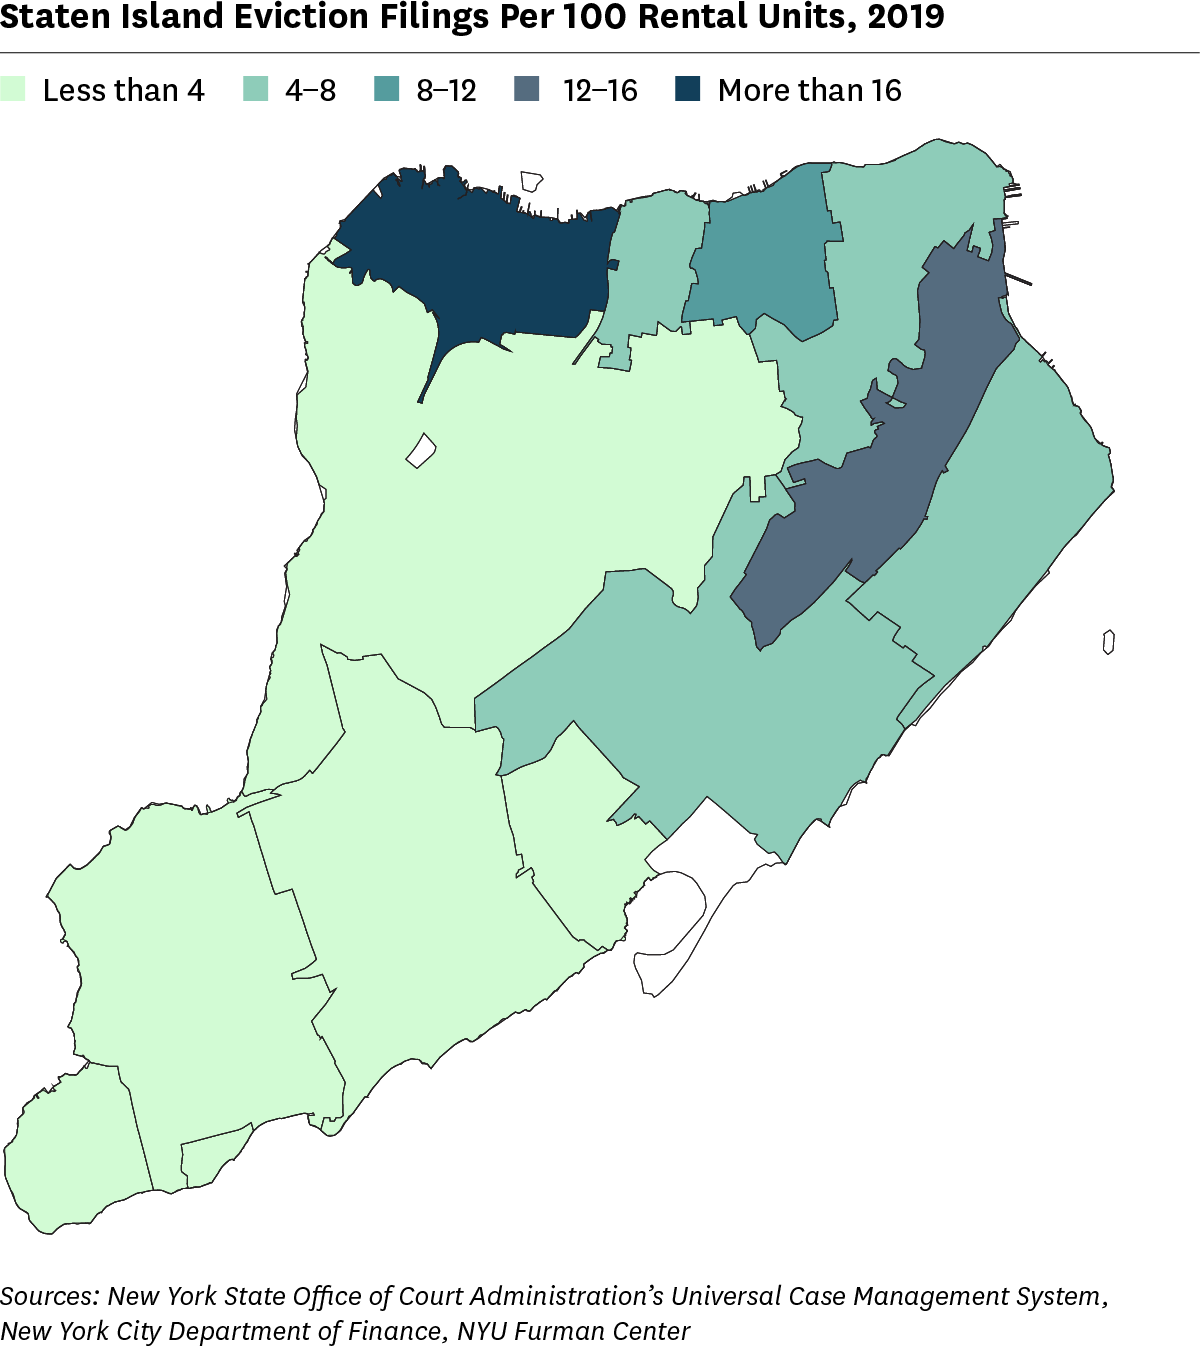 Map showing 2019 eviction filing rates for ZIP Code areas in Staten Island